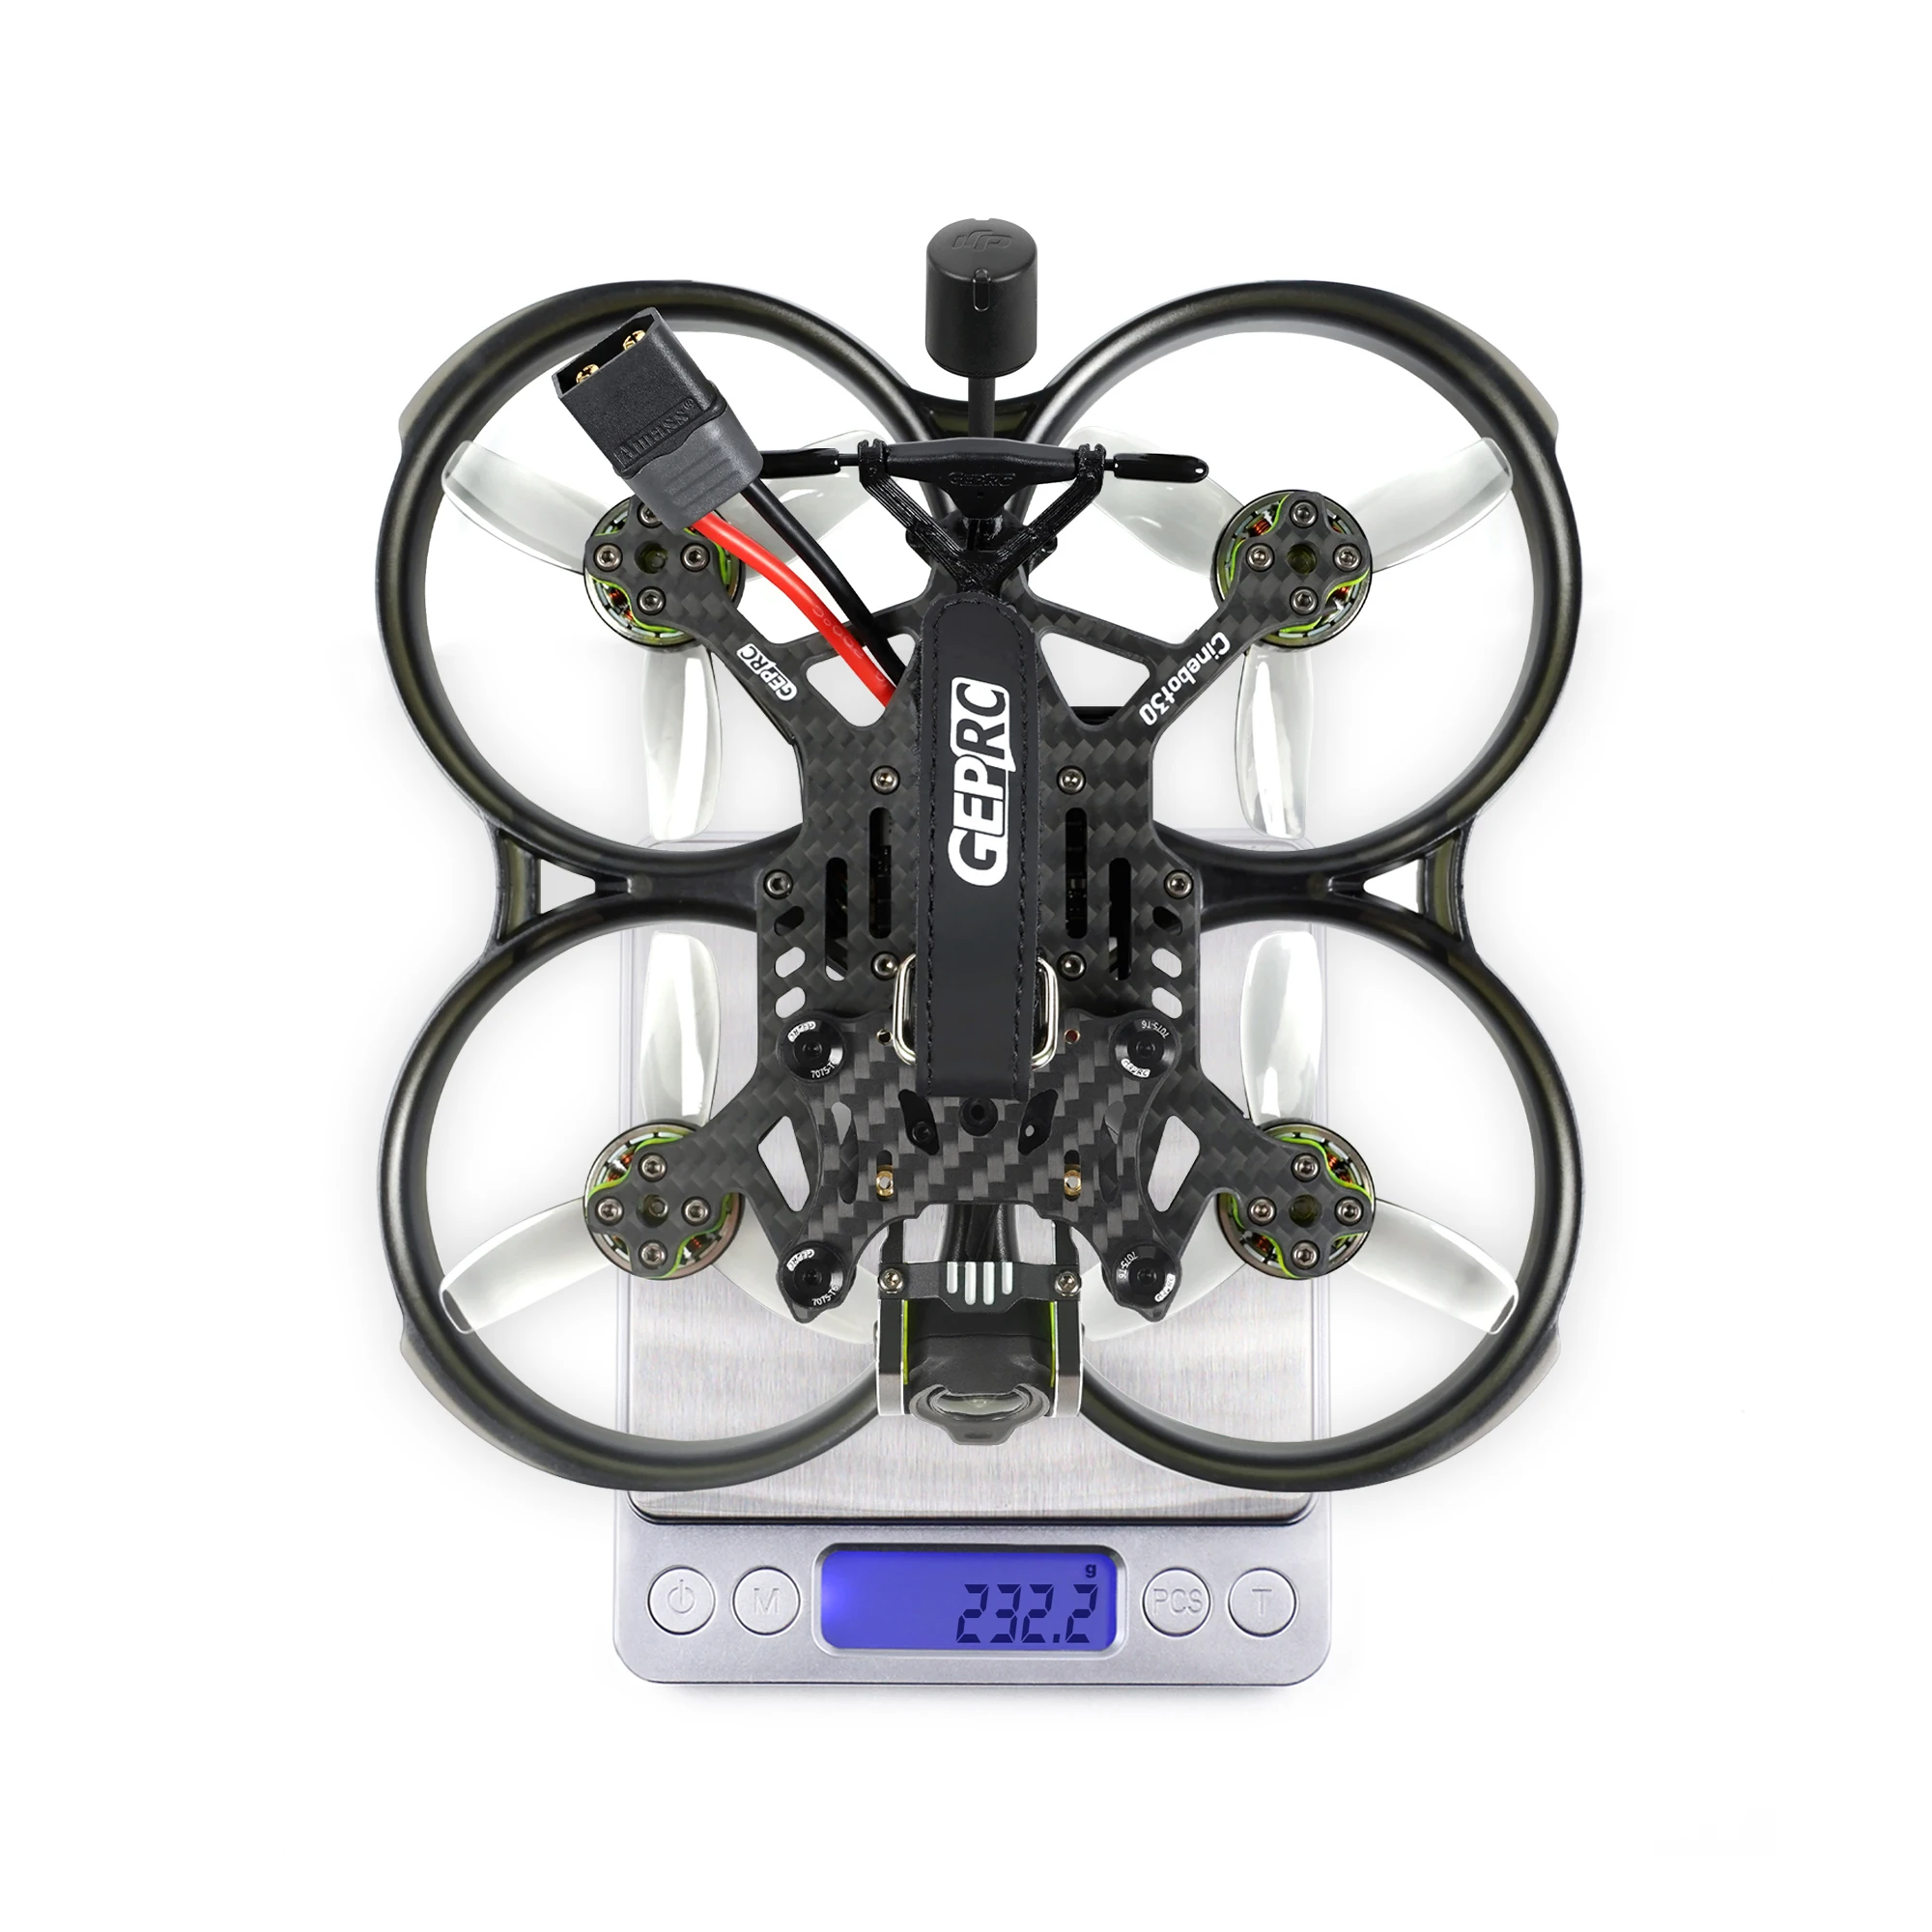 GEPRC Cinebot30 FPV Drone, the GEPRC Cinebot30 comes with a set of screws, screwdrivers